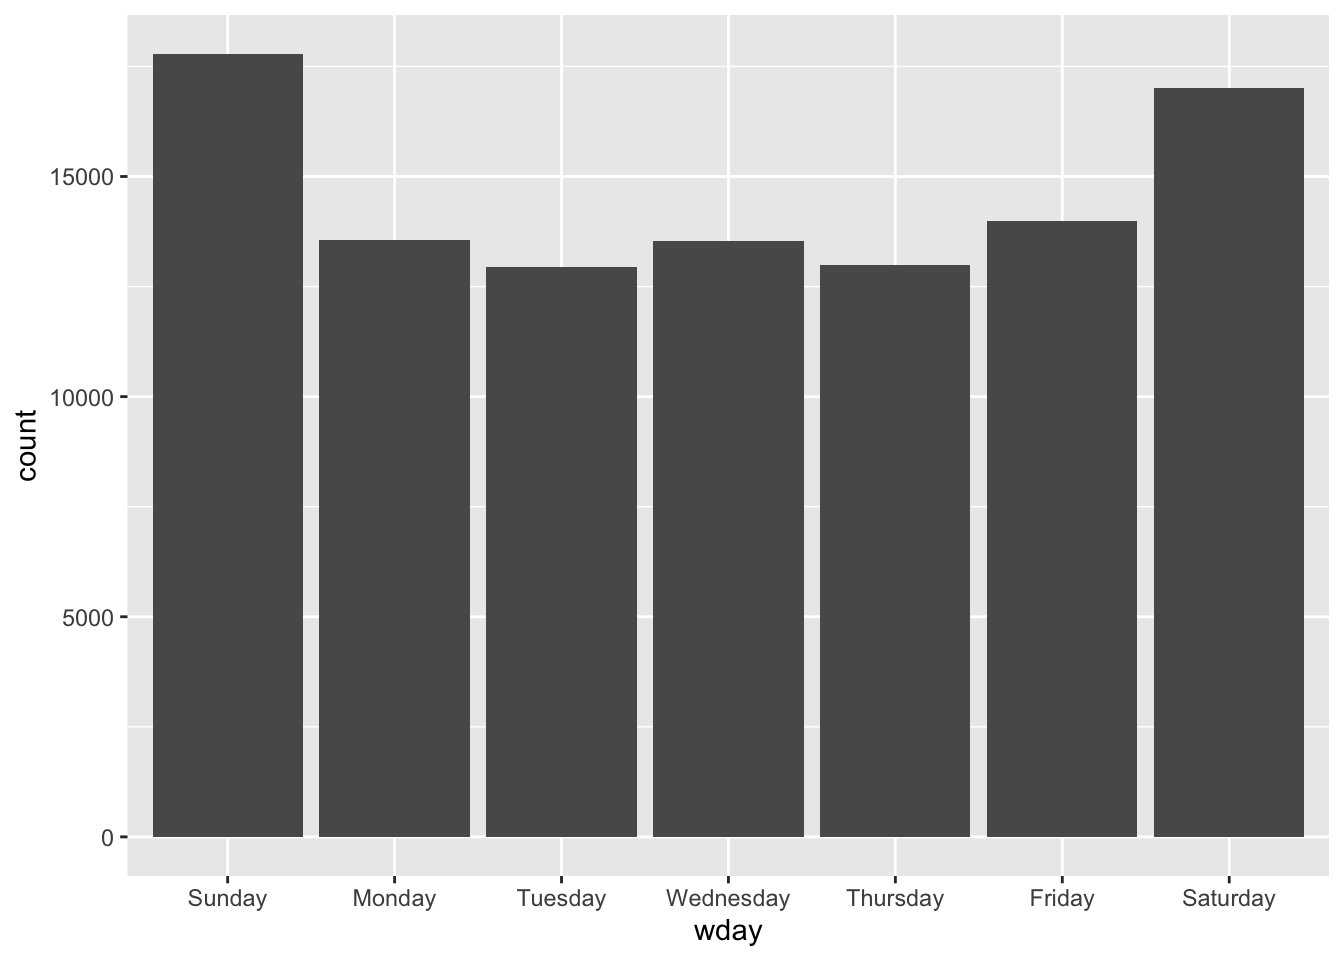 A bar chart with dark grey bars over a grey grid, with the vertical axis labeled as 'count', ranging from zero to nearly twenty thousand. The horizontal axis is labeled 'wday', and includes each day of the week. Sunday and Saturday are clearly ahead, reaching over seventeen thousand, while Monday through Friday stay around thirteen thousand.